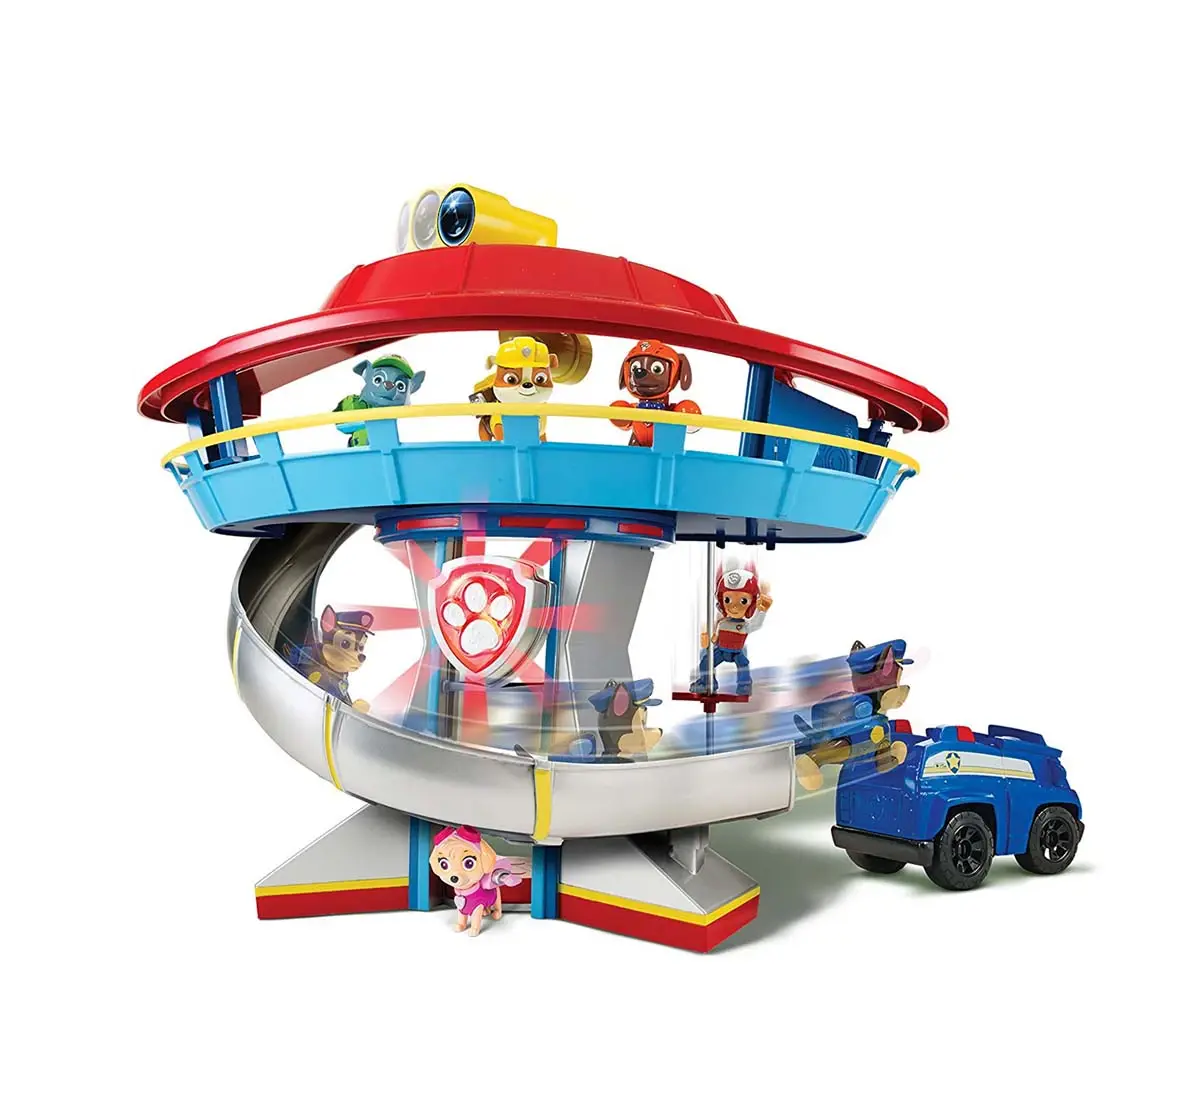 Paw Patrol Lookout Tower Playset Activity Toys for Kids age 3Y+ 